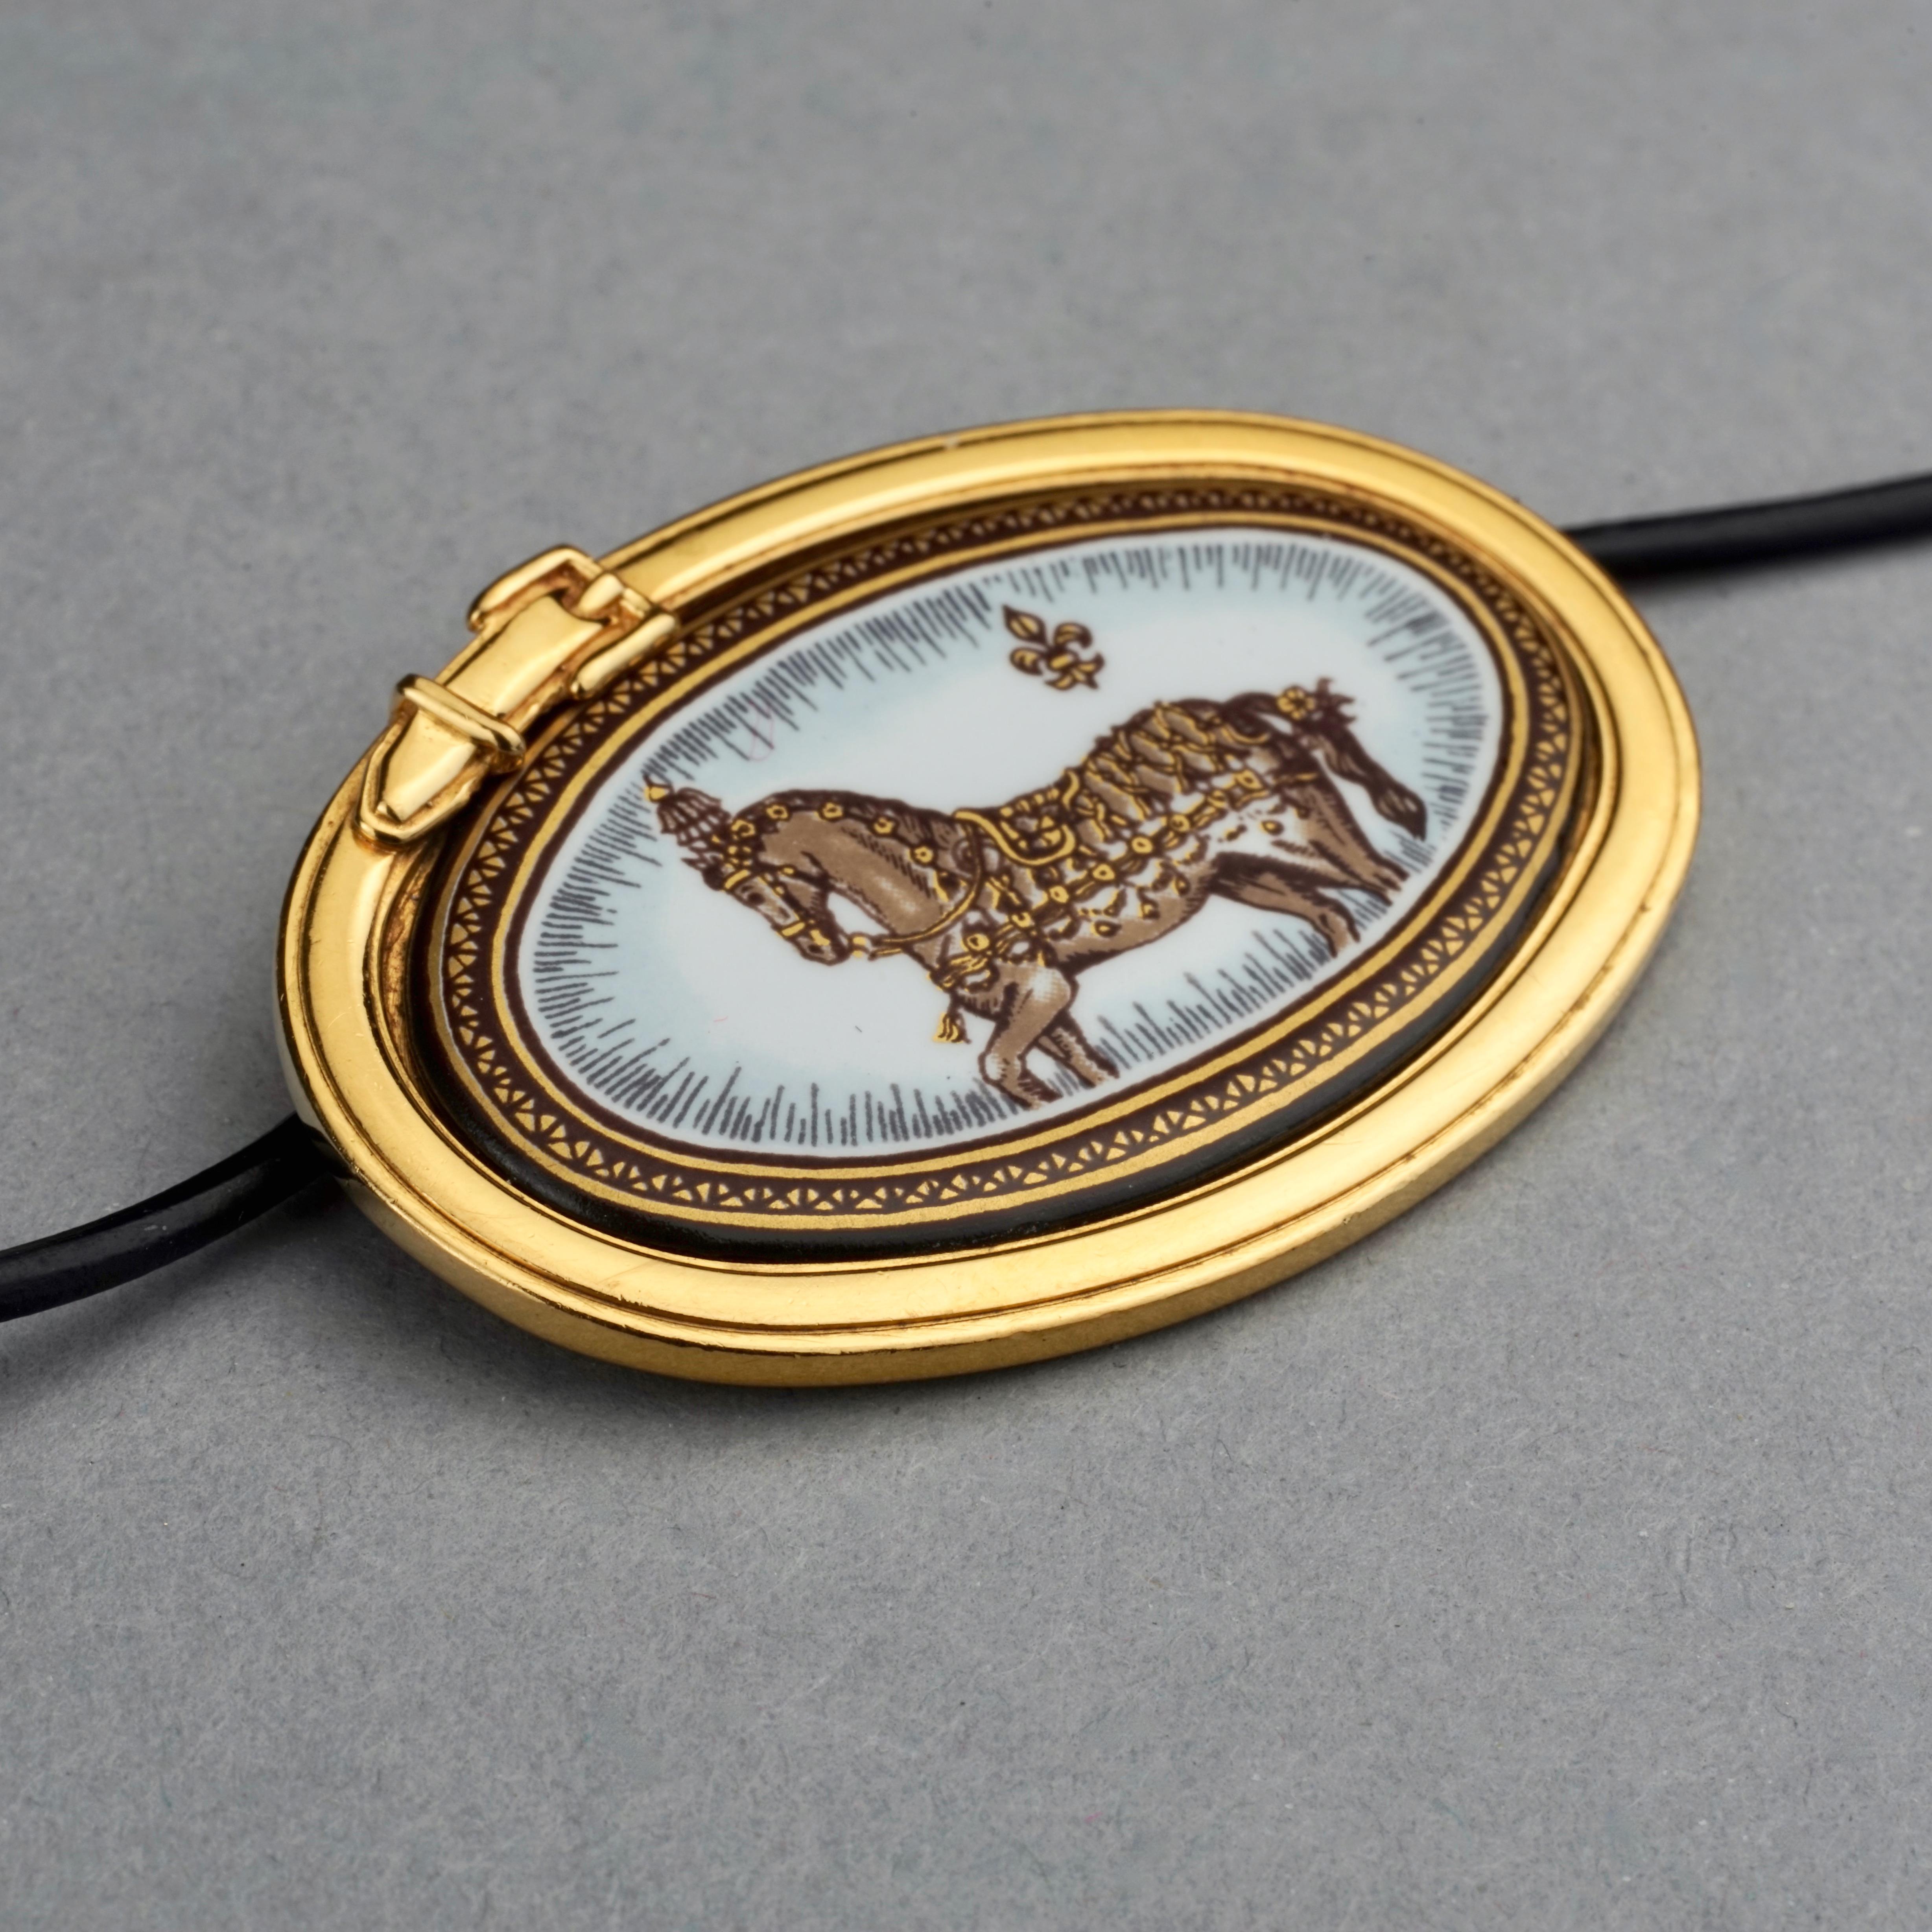 Vintage HERMES Horse Enamel Pendant 

Measurements: 
Height: 1.18 inches (3 cm)
Pendant Width: 1.77 inches (4.5 cm)

Features:
- 100% Authentic HERMES.
- Iconic horse print enamel pendant.
- Gold tone hardware.
- Black strap (not from Hermes) ties